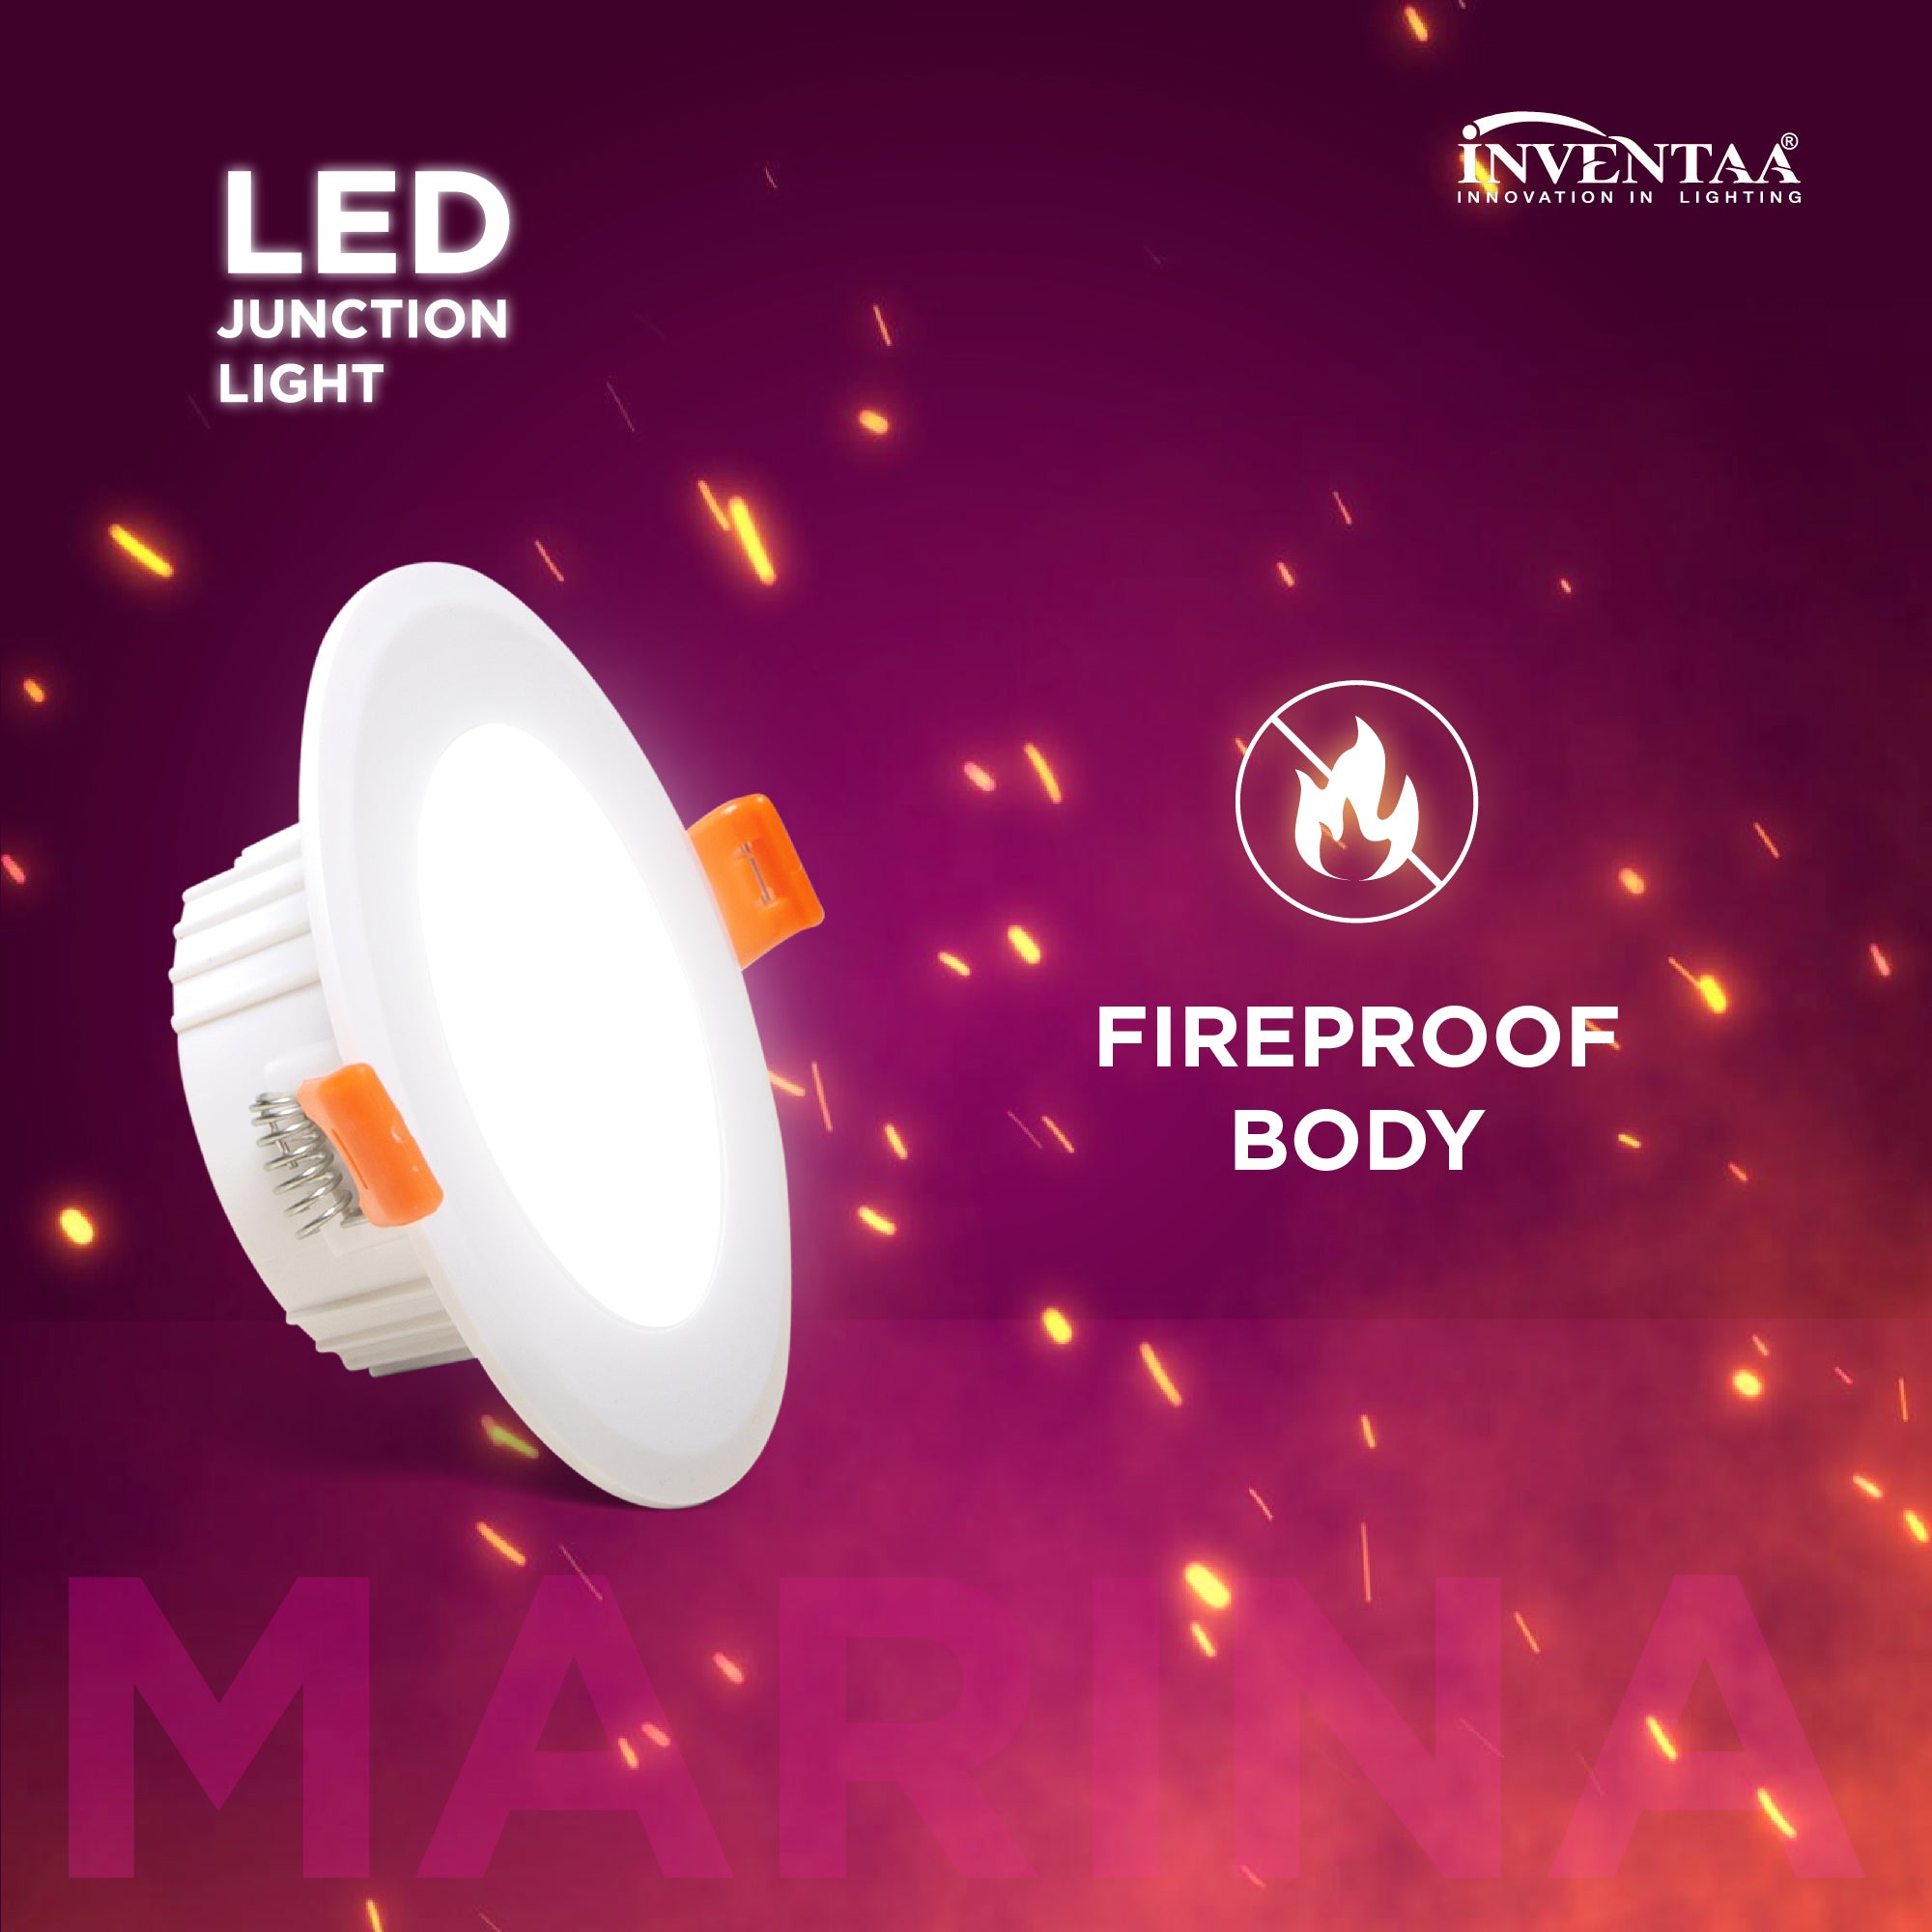 Marina 3W LED Junction Light Featuring Its Fireproof Resistance #Suitable For_2 inch Flat Junction Box